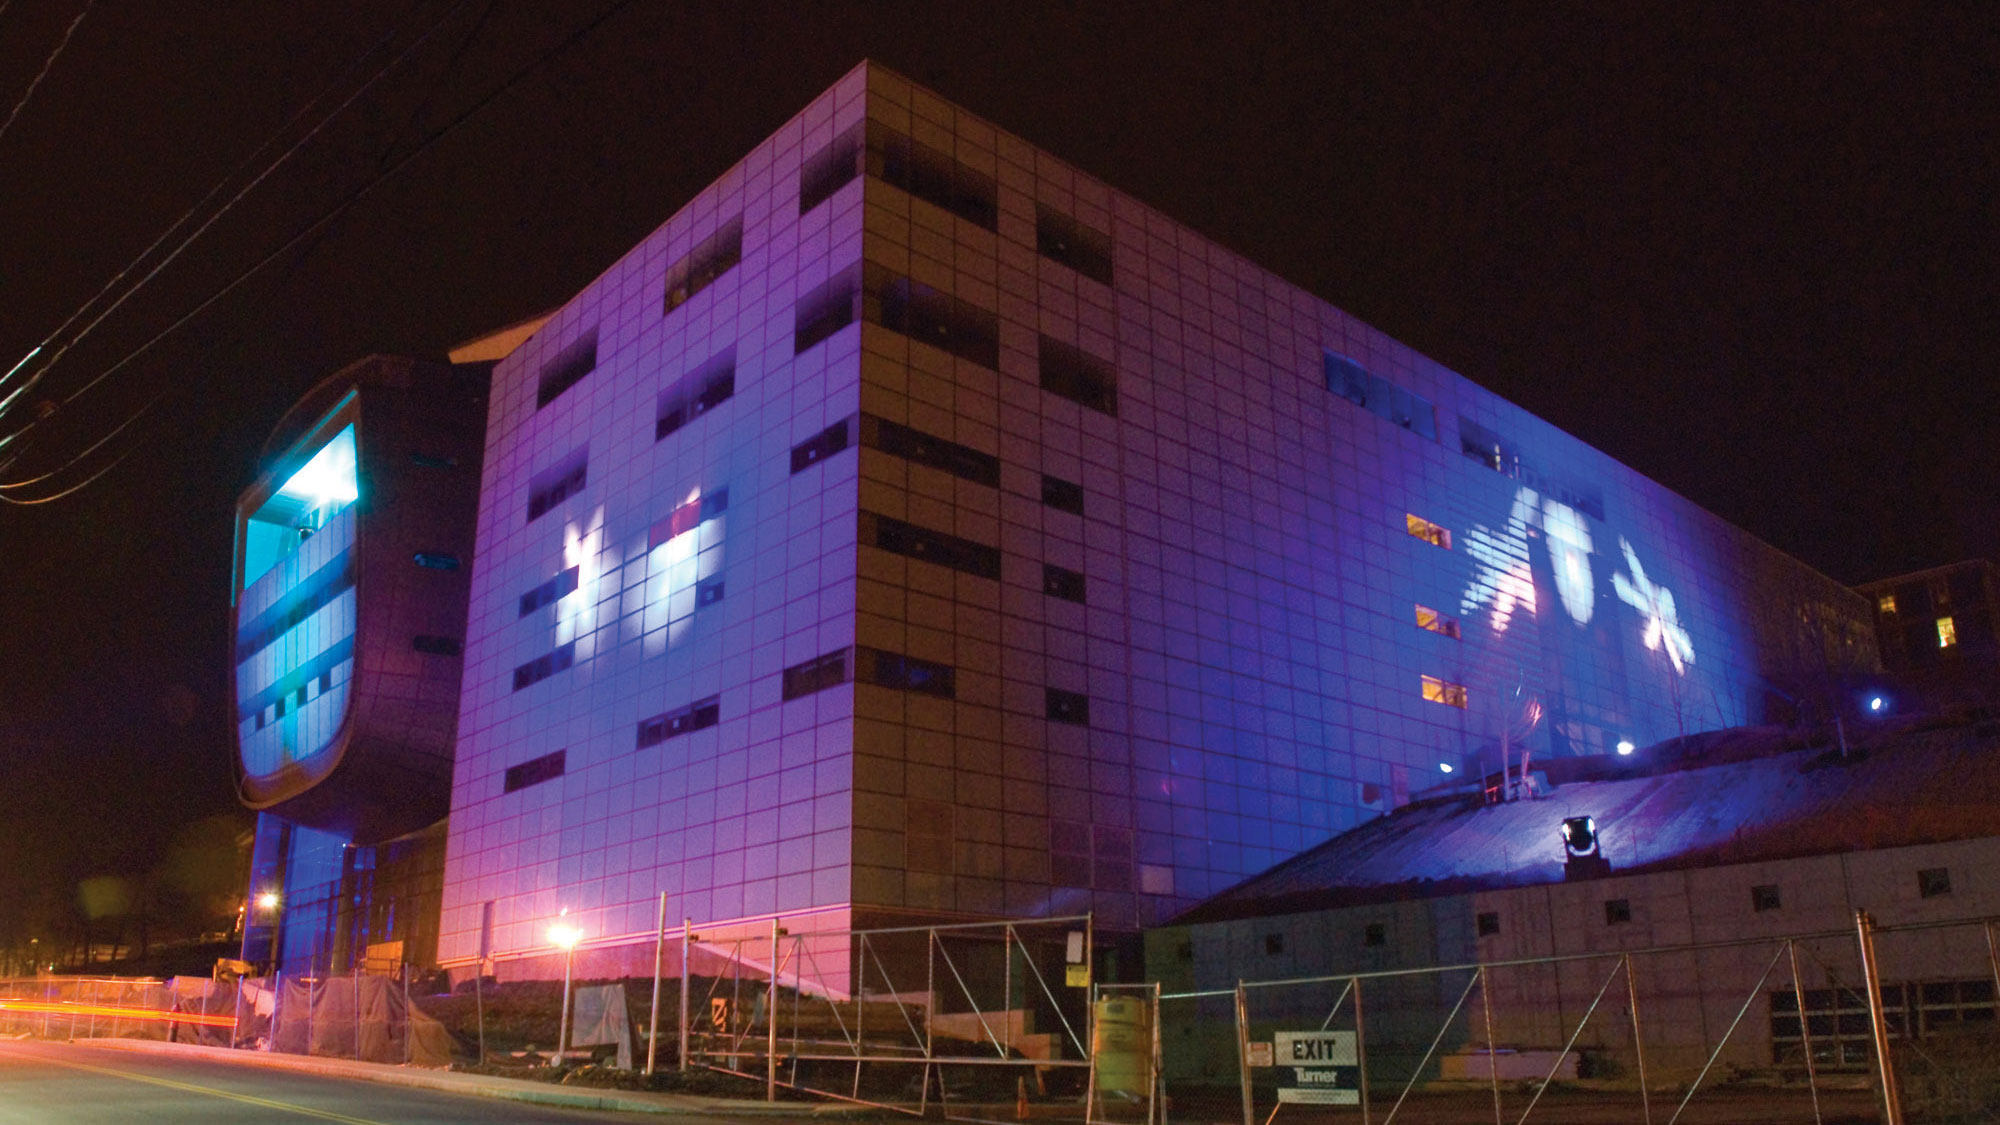 The exterior of EMPAC during construction lit at night with blue/purple lighting. 